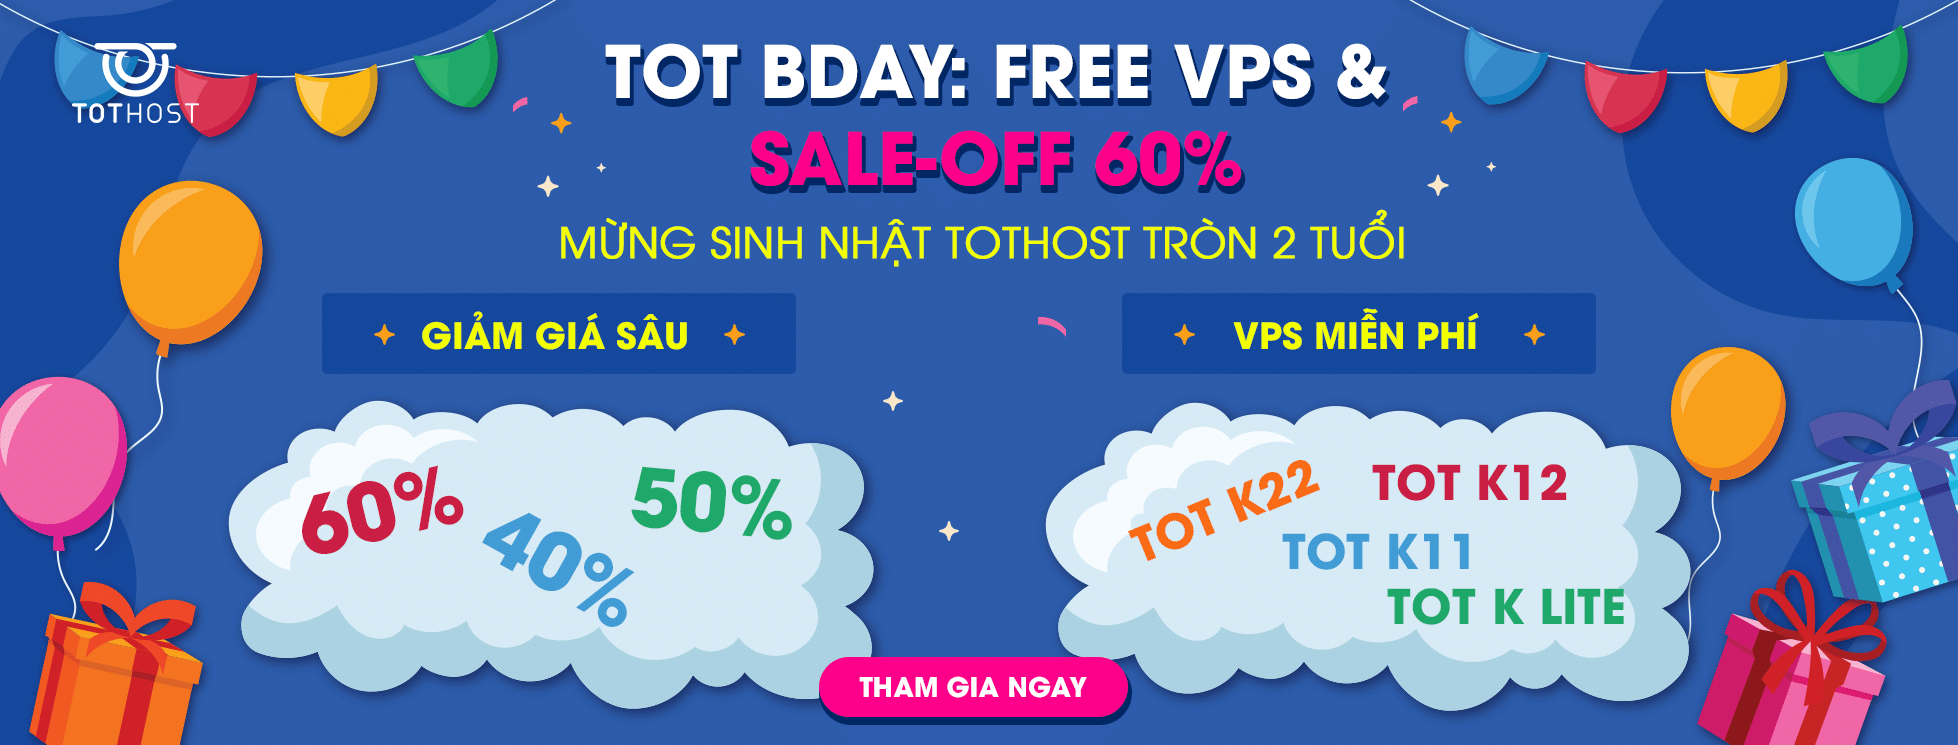 TOT BDAY: FREE VPS & SALE-OFF 60%